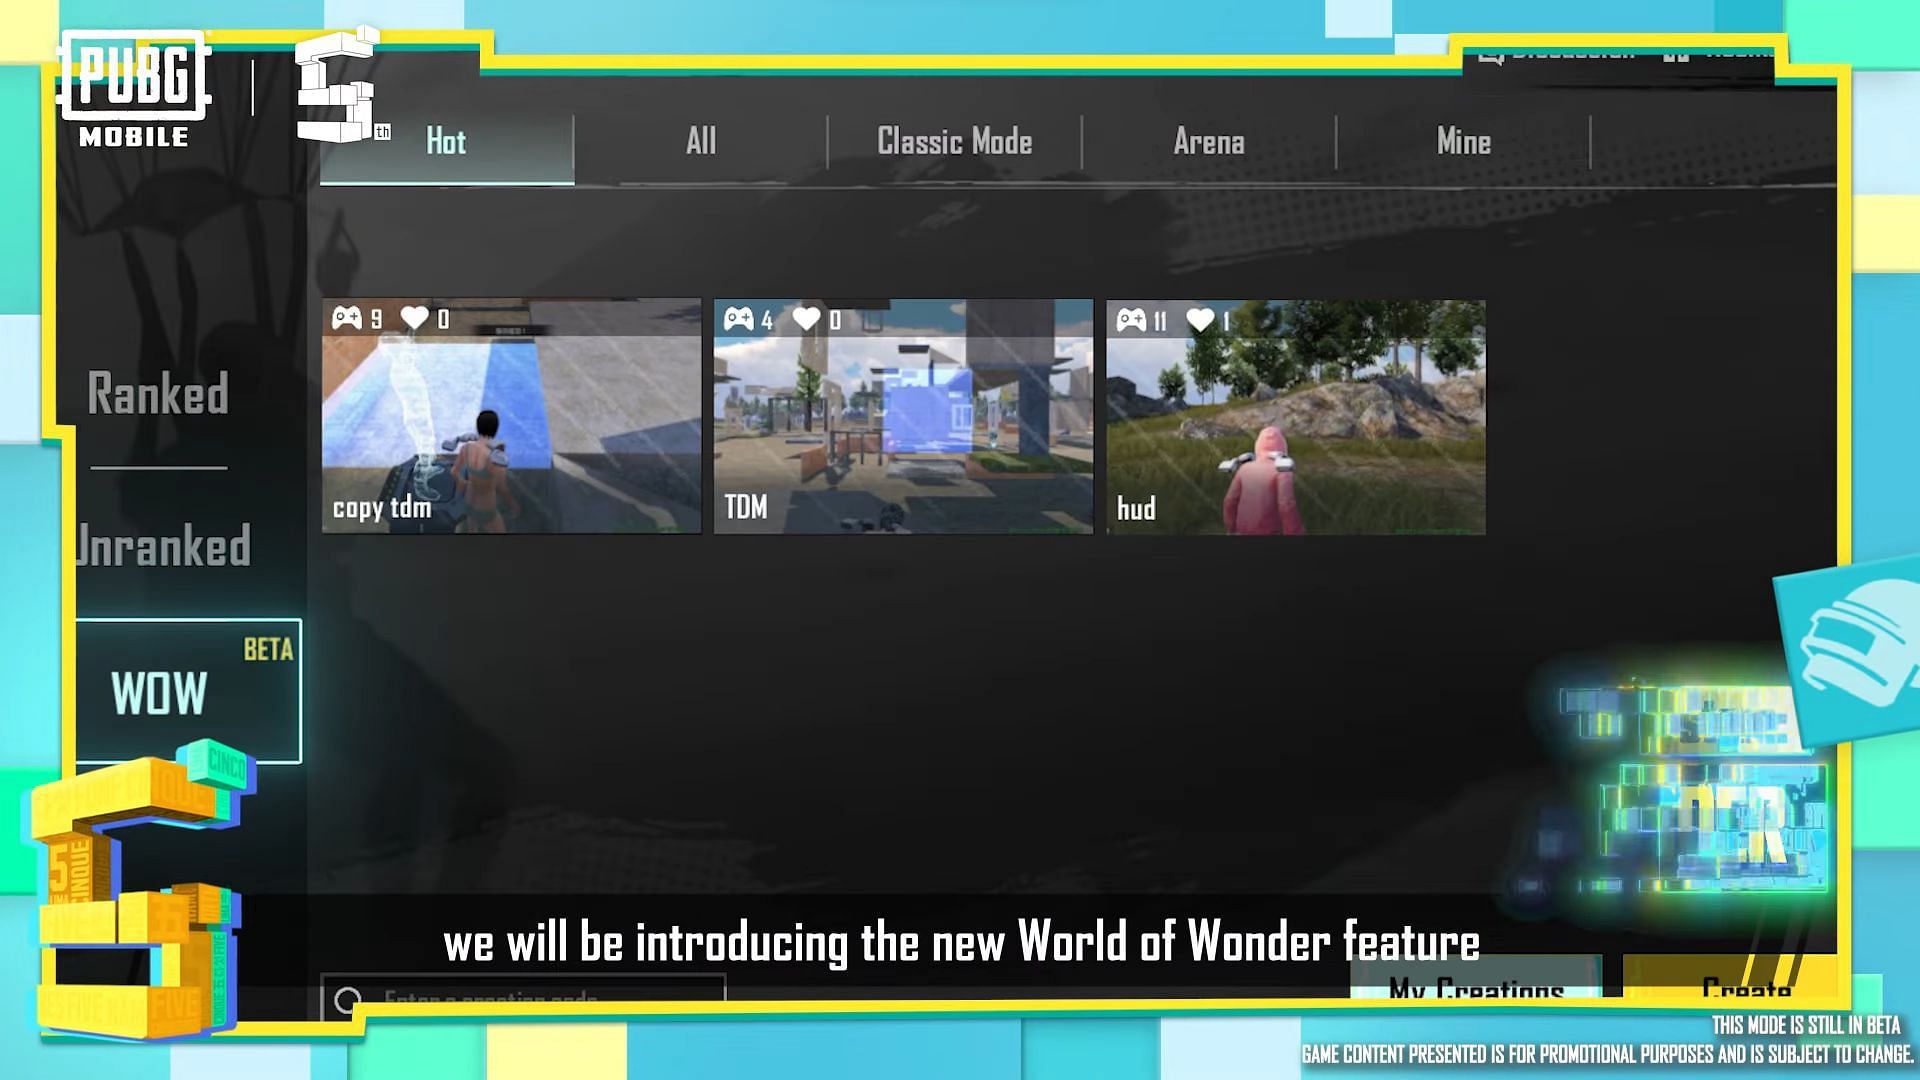 World of Wonder - A new Gameplay System in PUBG Mobile 2.5 (Image via Tencent)